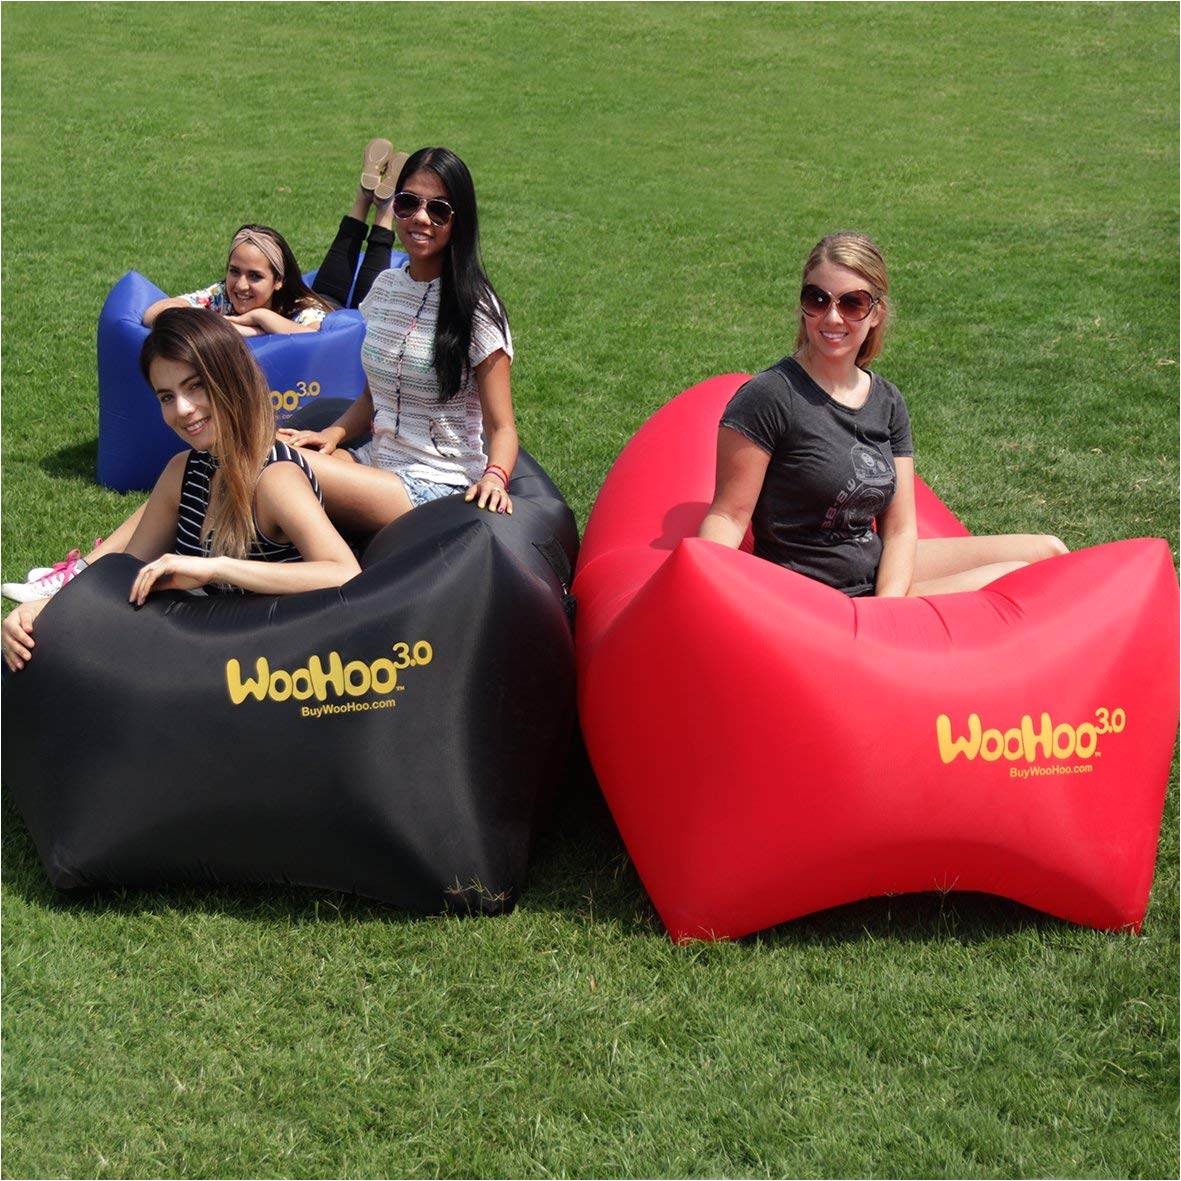 Wind Blow Up Chairs Amazon Com Best Selling Woohoo 3 0 Giant Outdoor Inflatable